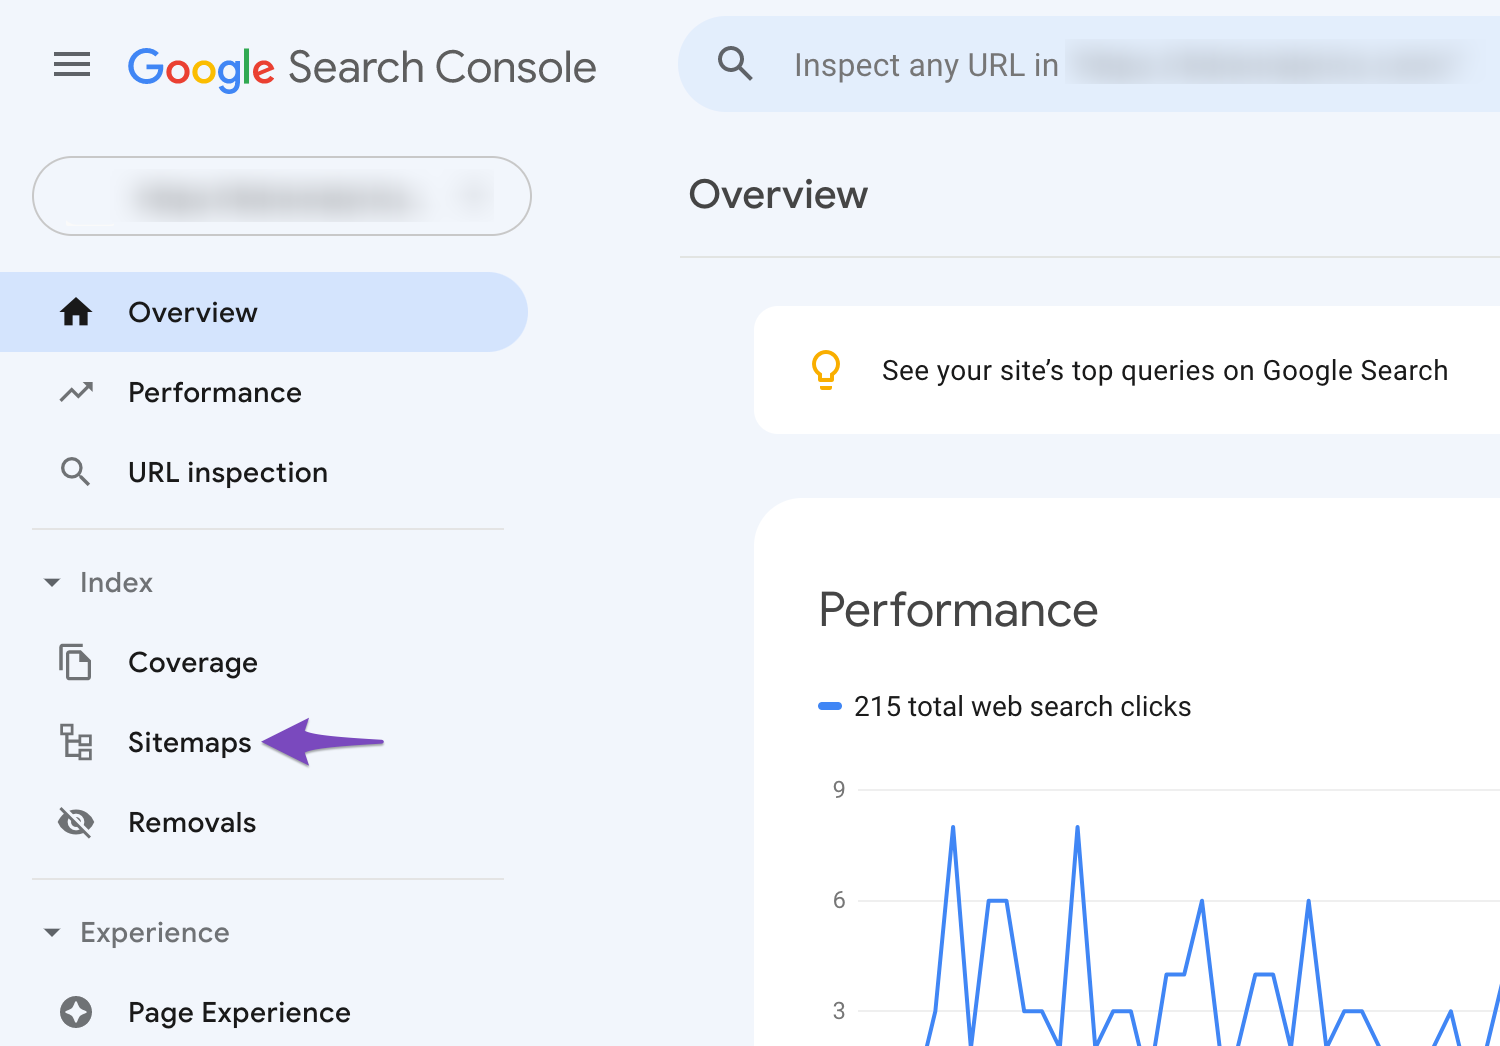 Access sitemaps in Google Search Console